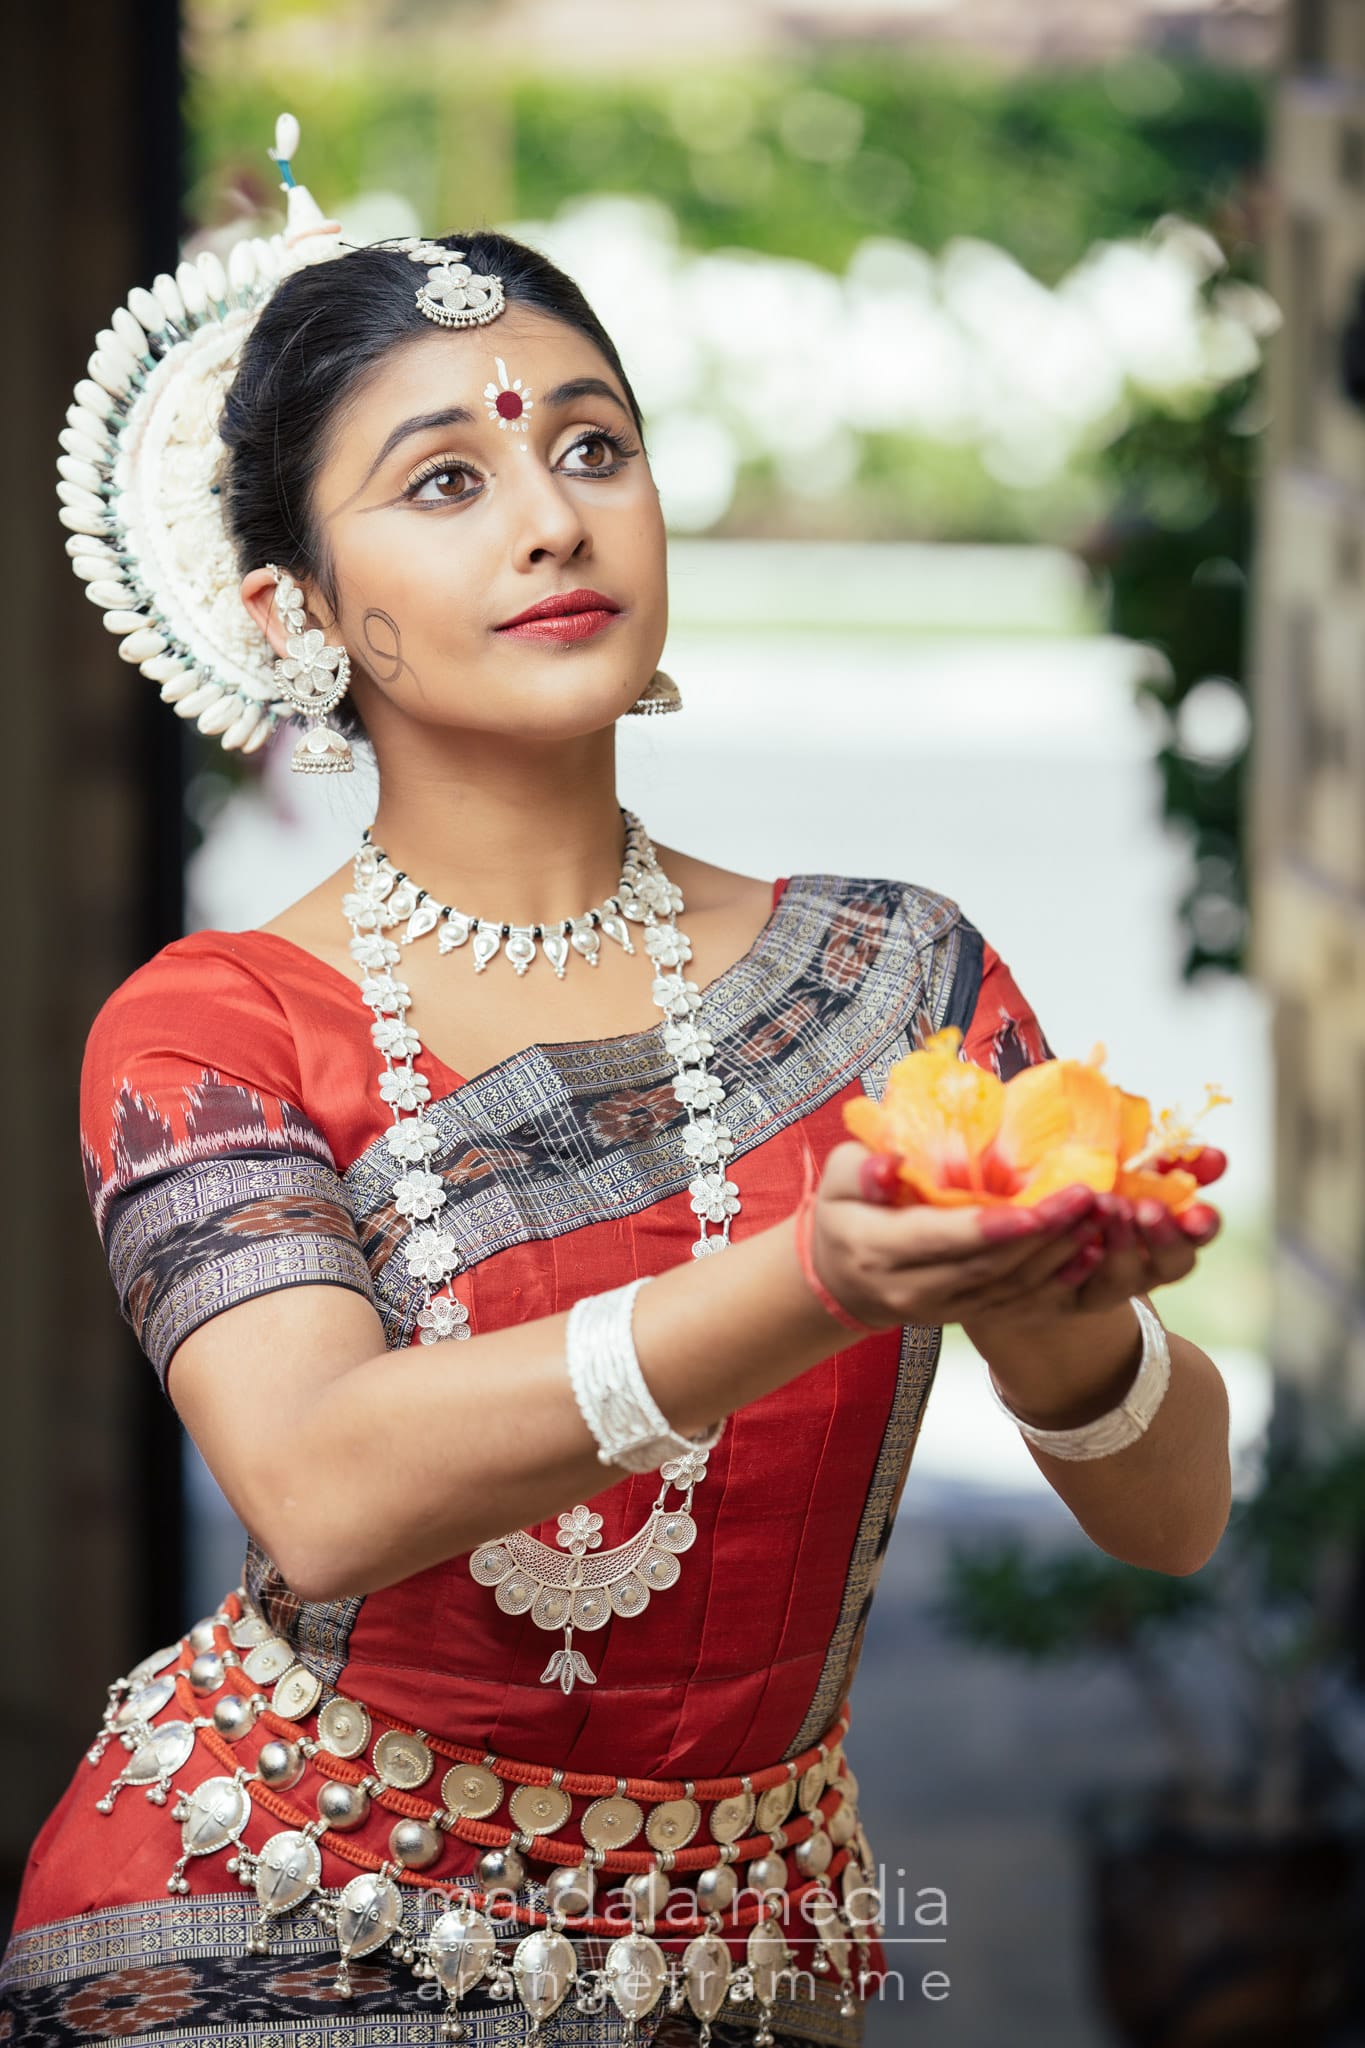 Indian Classical Odissi Dance · Free Stock Photo